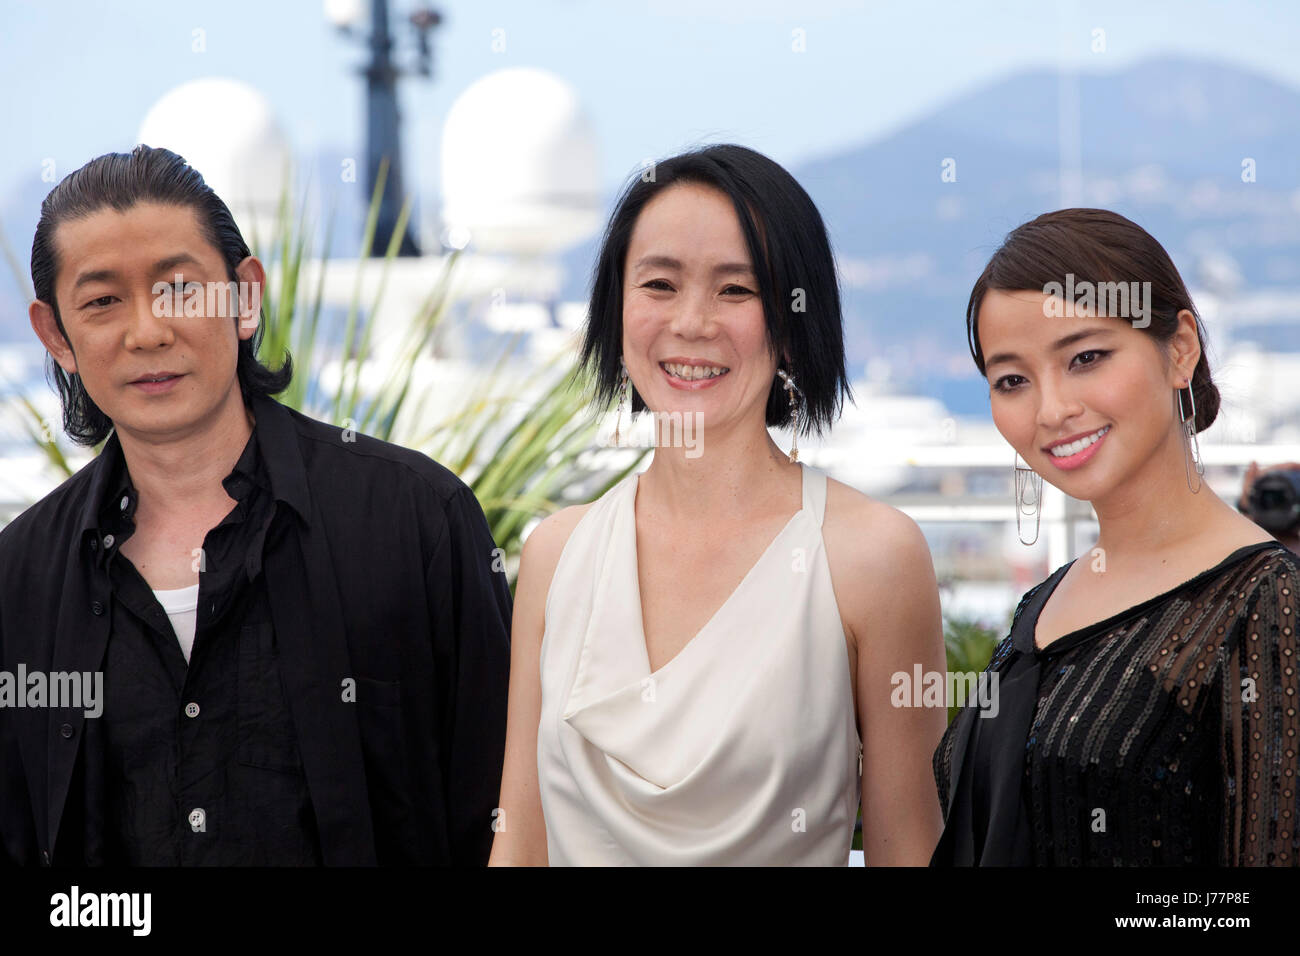 Cannes, France. 23rd May, 2017. Nagase Masatoshi, Director Naomi Kawase and Ayame Misaki at the Hikari (Vers La Lumiere / Radiance) photo call at the 70th Cannes Film Festival Tuesday 23rd May 2017, Cannes, France. Credit: Doreen Kennedy/Alamy Live News Stock Photo